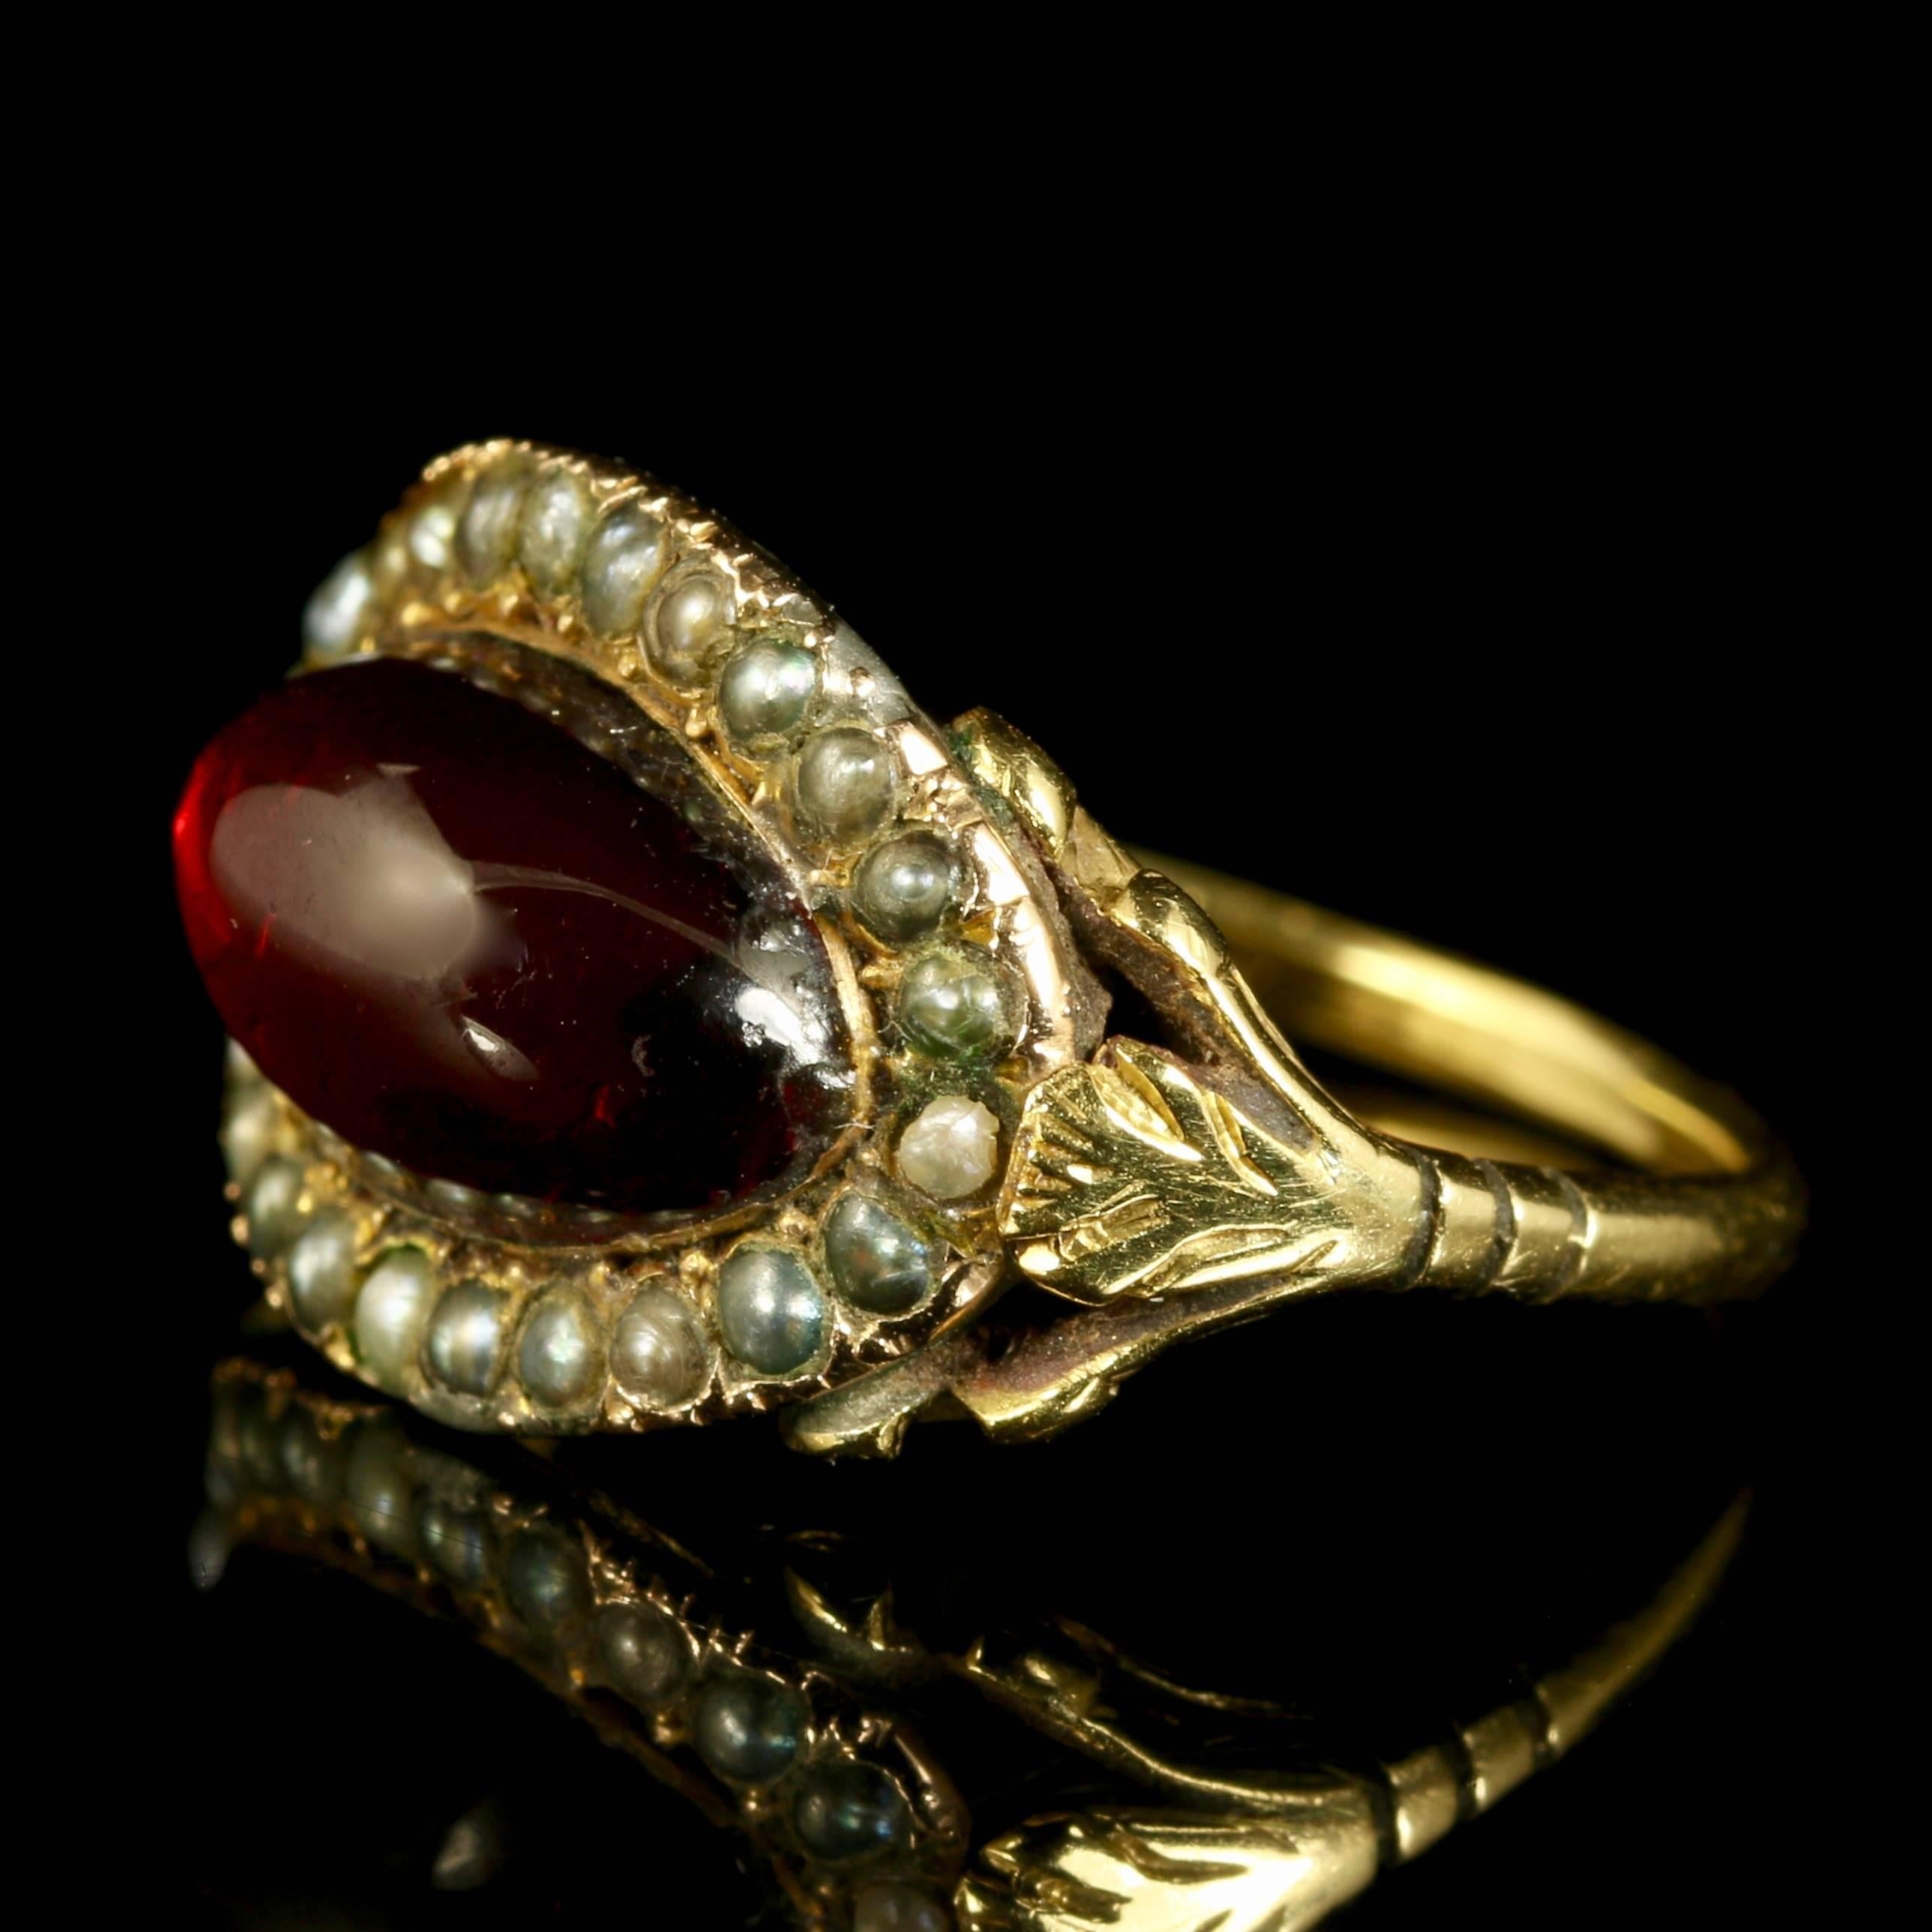 This is a stunning Georgian 18ct yellow gold ring, Circa 1800. 

The ring is set with fabulous Georgian workmanship from its time, boasting a deep rich red garnet surrounded by pearls.

The Garnet is a stone of purity and truth as well as a symbol